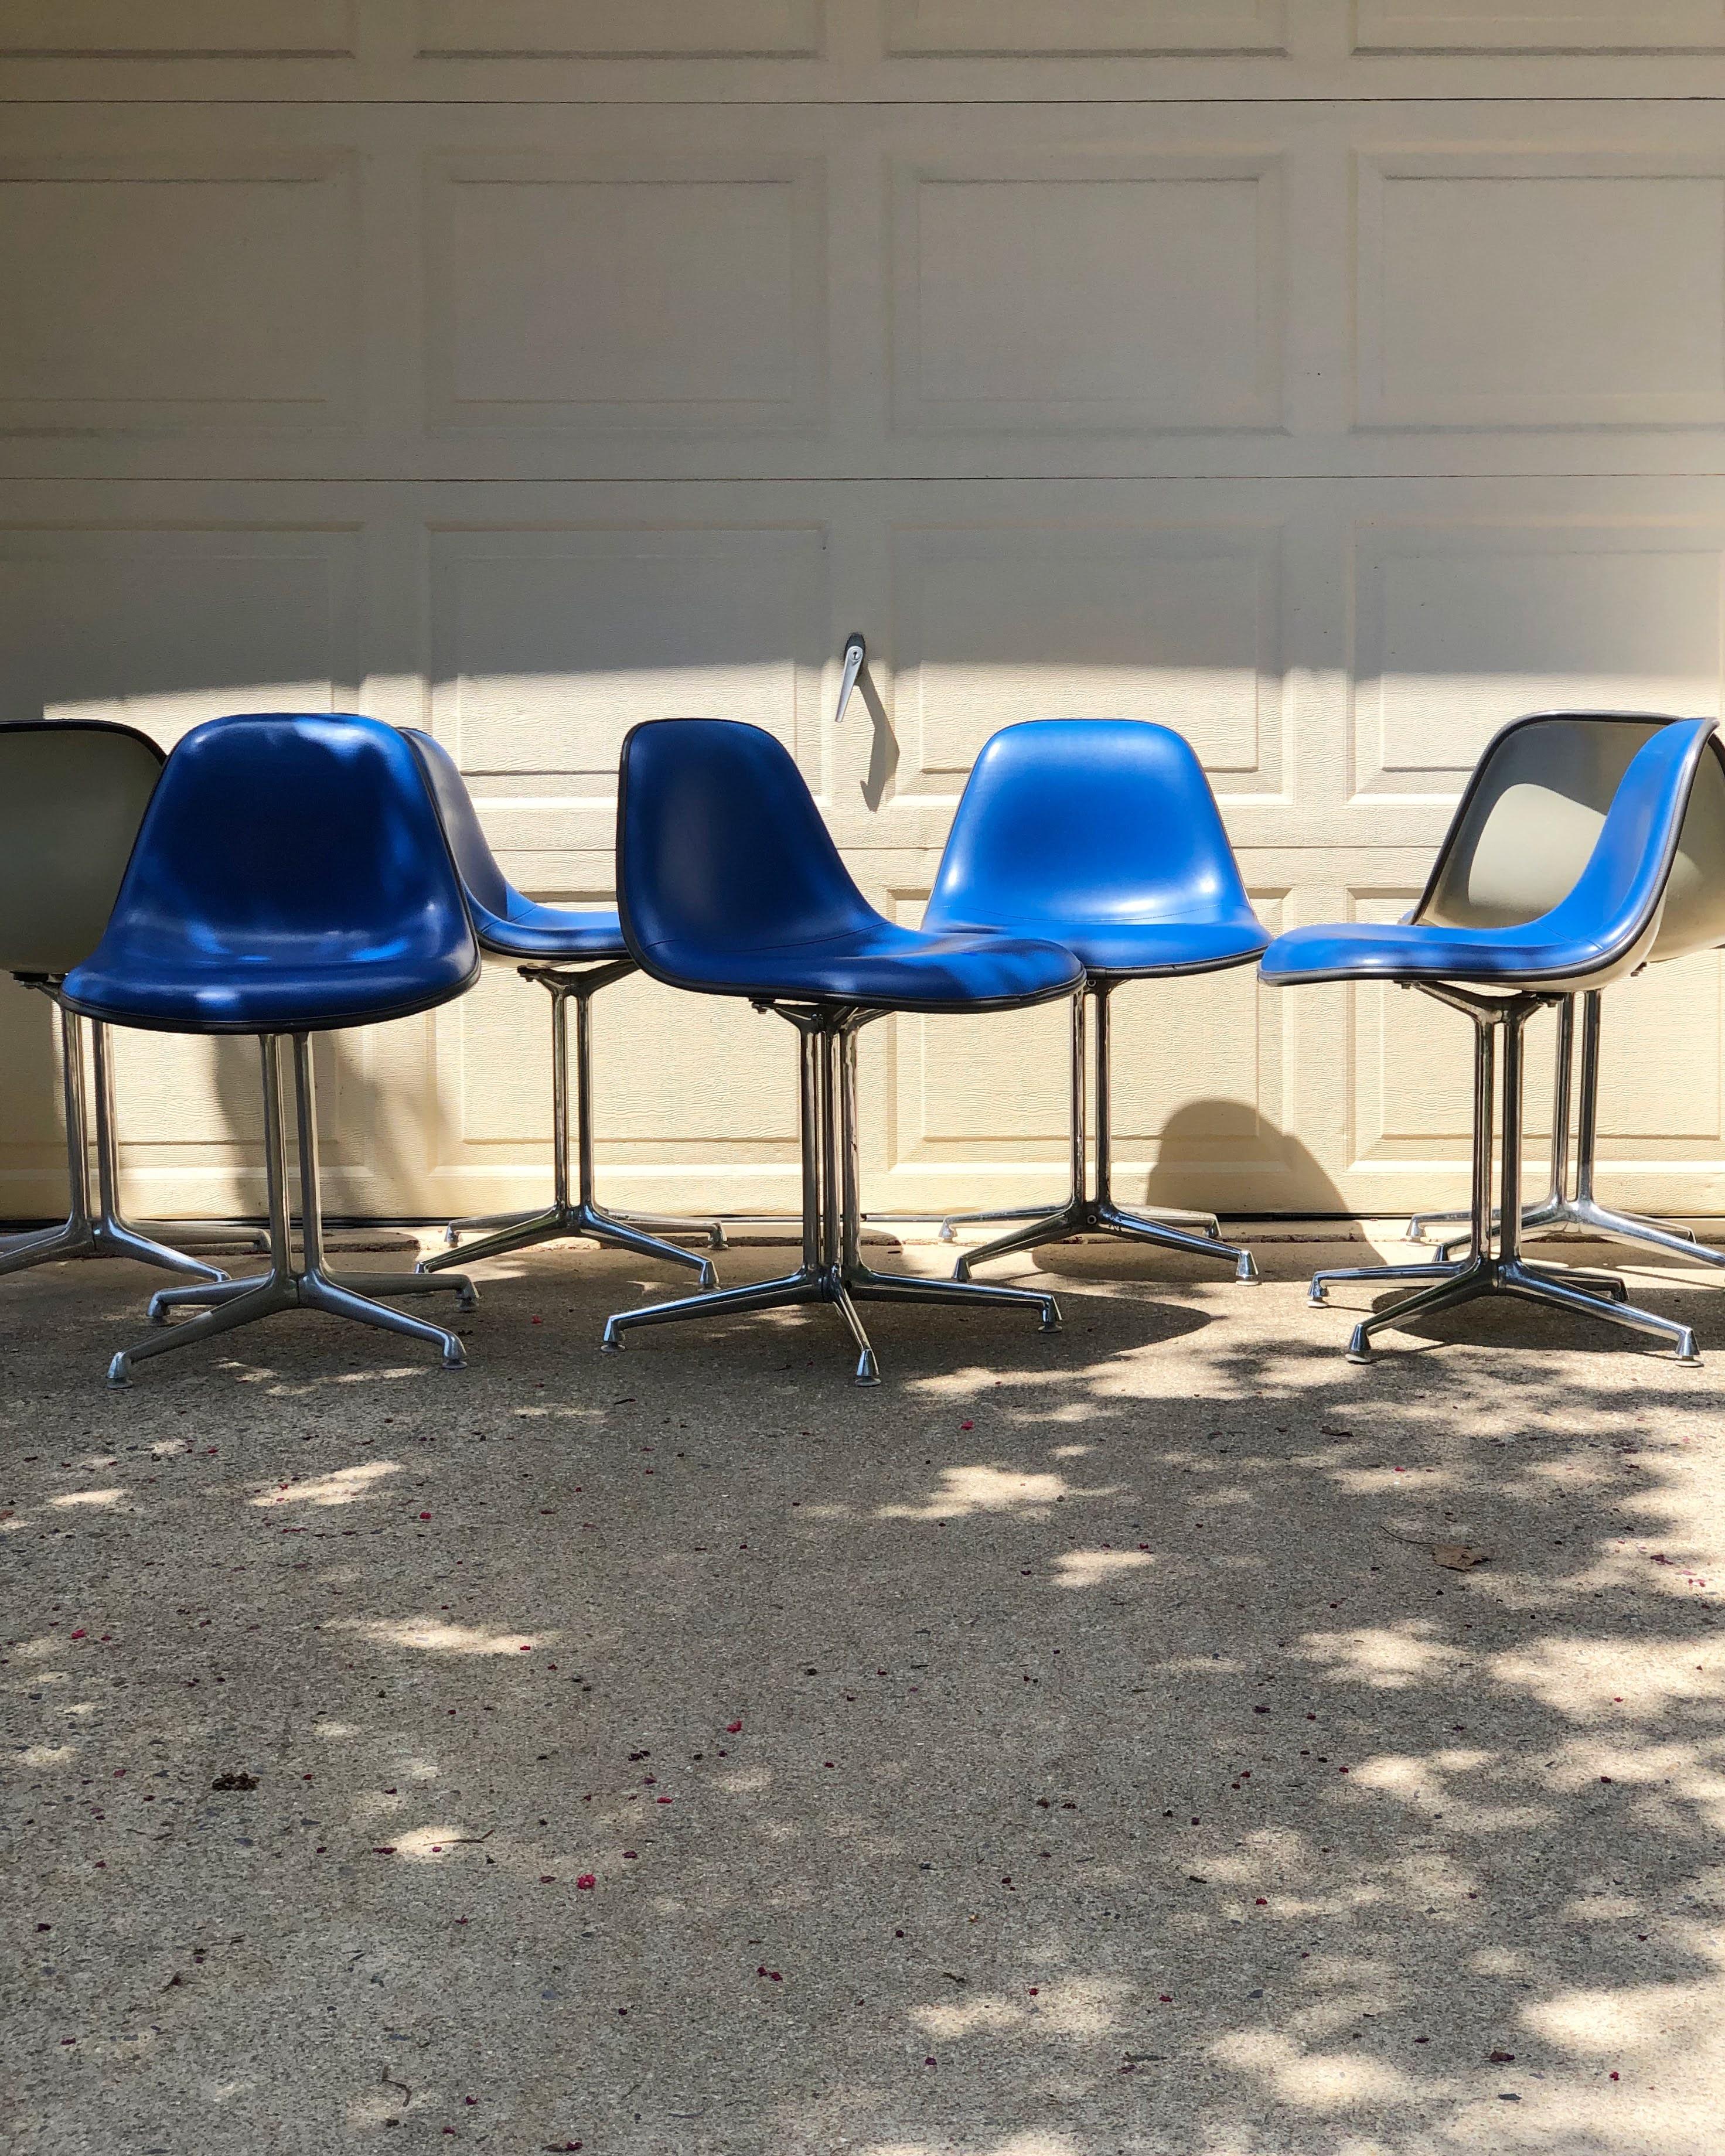 This arm chair is one of two new fiberglass chairs Charles and Ray Eames designed in 1961, inspired by request from Alexander Girard, who needed seating for his new Manhattan restaurant, La Fonda Del Sol. Some collectors call these “La Fonda” chairs